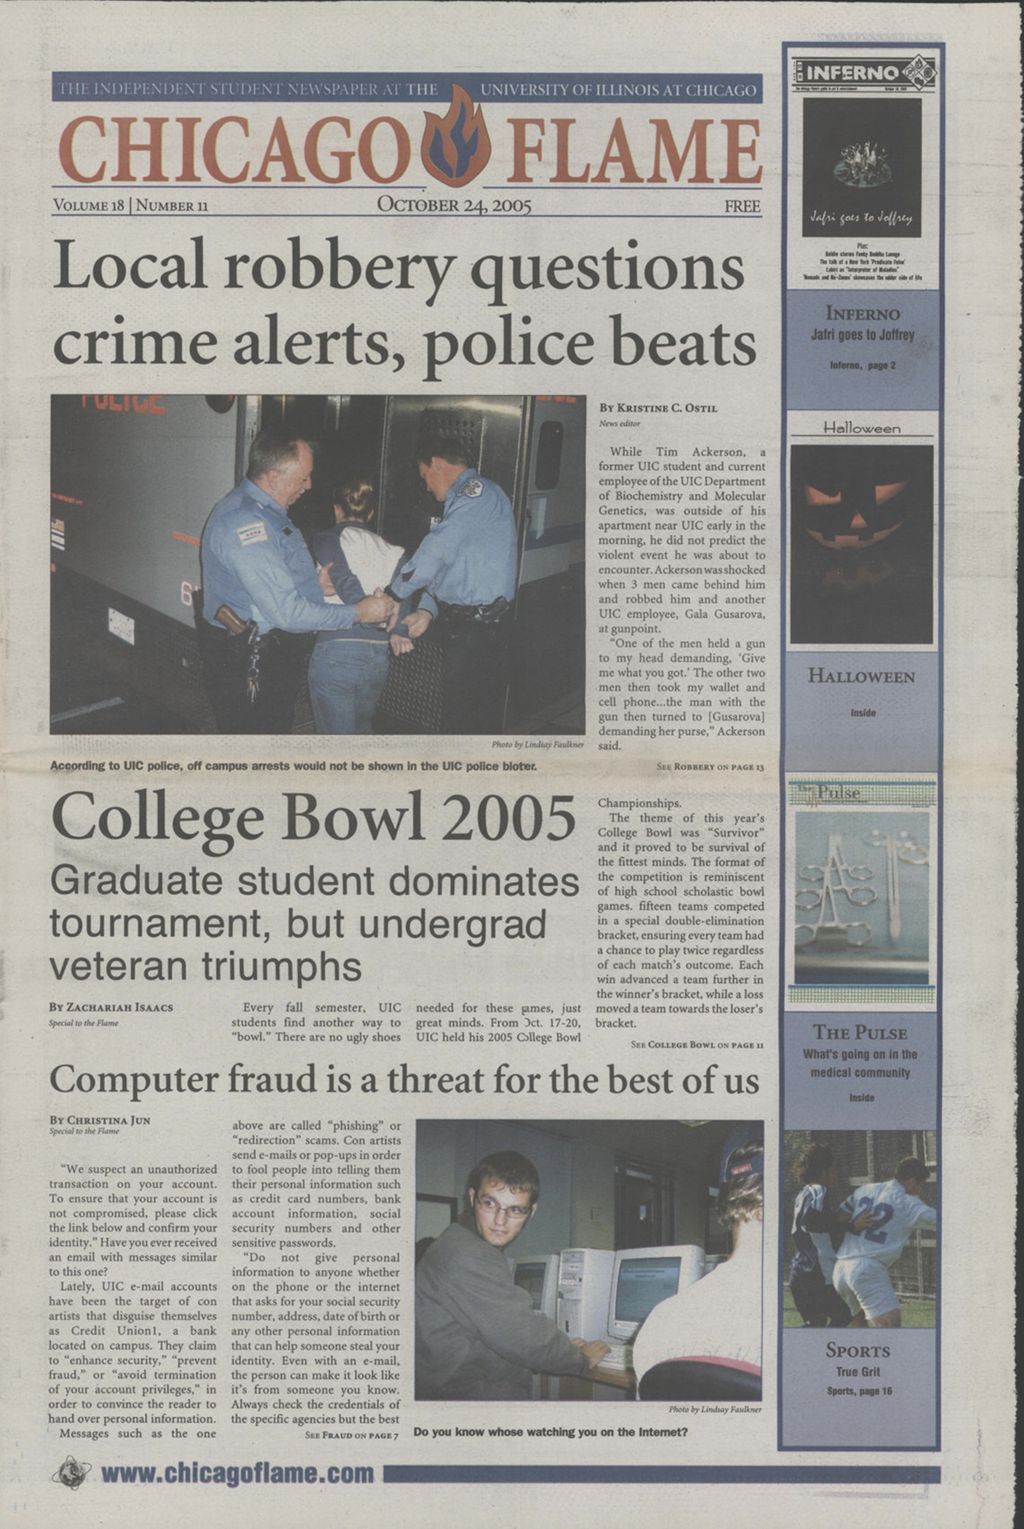 Chicago Flame (October 24, 2005)